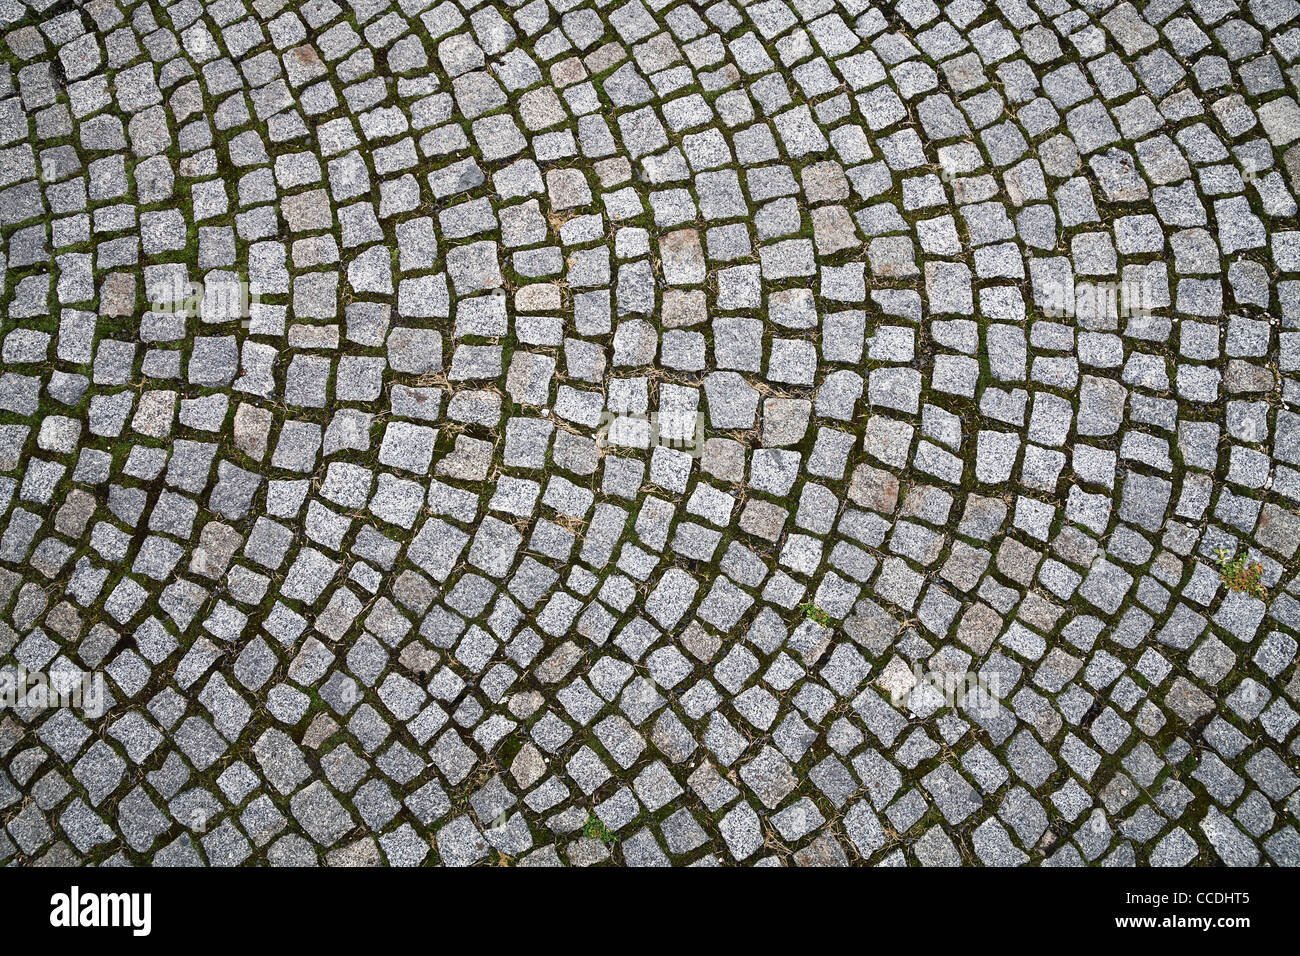 Closeup view on a cobblestone road - pattern - background Stock Photo